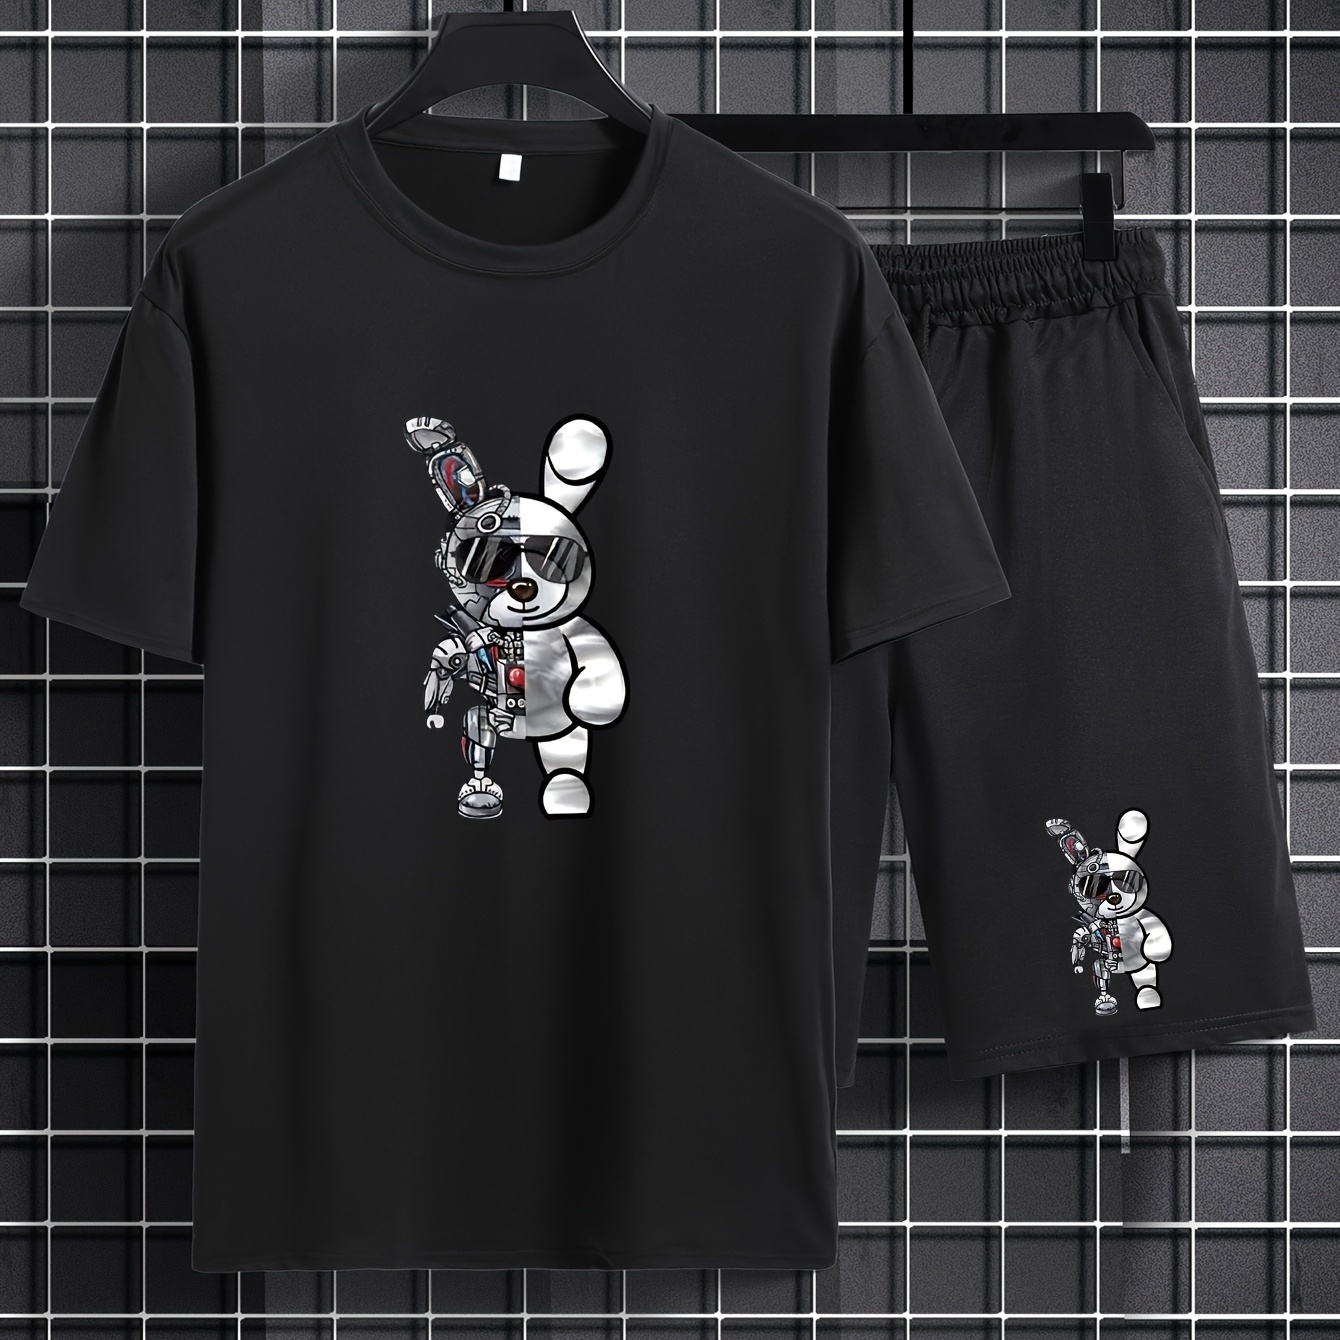 

Robot Rabbit 2pcs Trendy Outfits For Men, Casual Crew Neck Short Sleeve T-shirt And Drawstring Shorts Set For Summer, Men's Clothing Vacation Workout